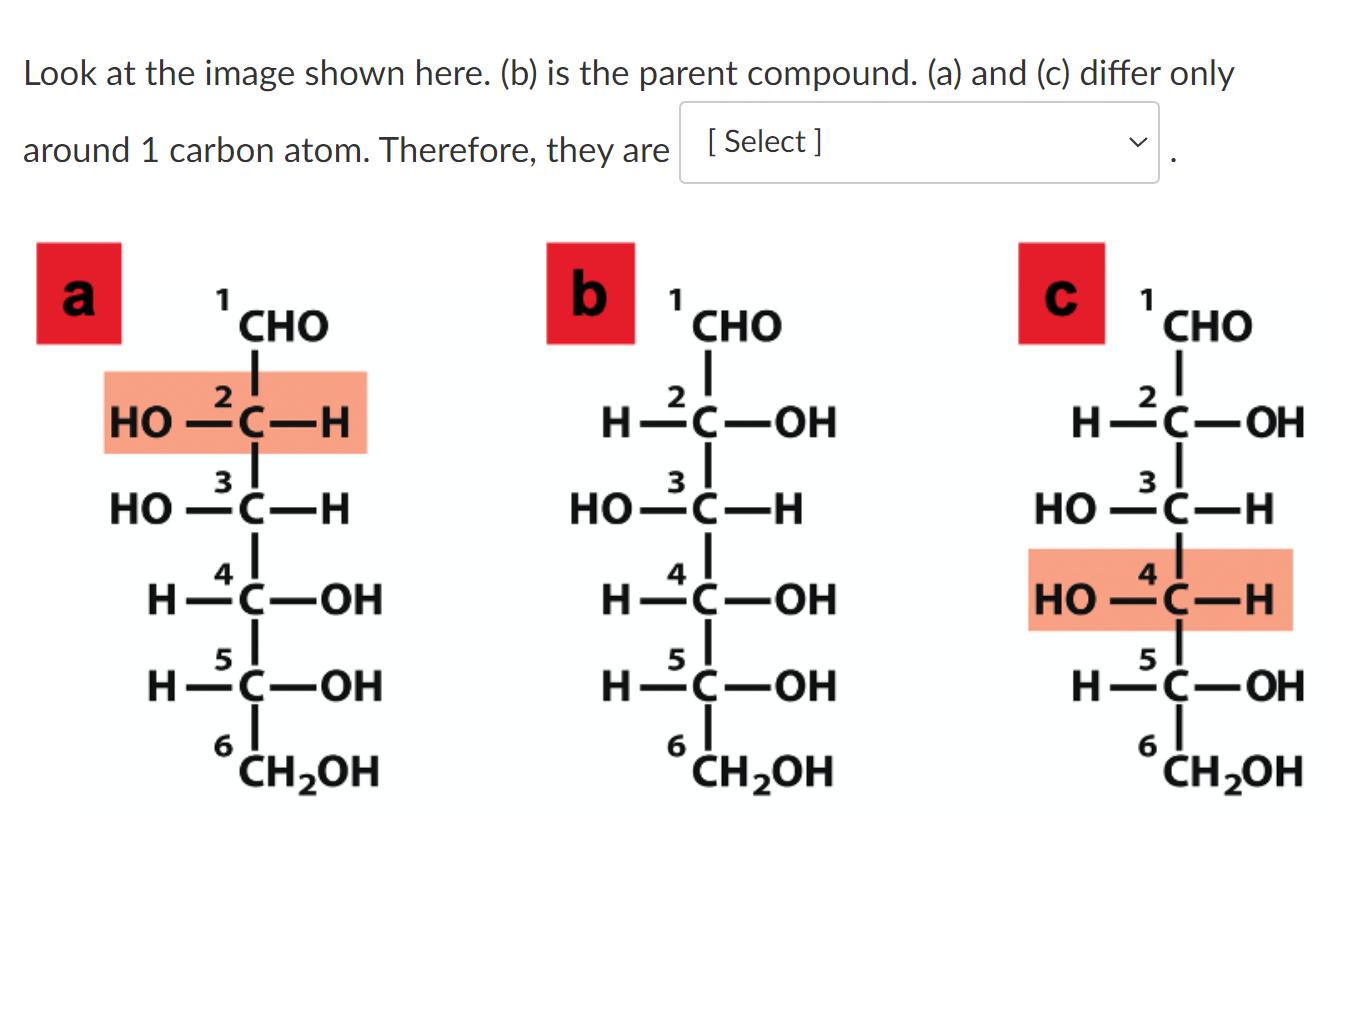 Look at the image shown here. (b) is the parent compound. (a) and (c) differ only around 1 carbon atom. Therefore, they are